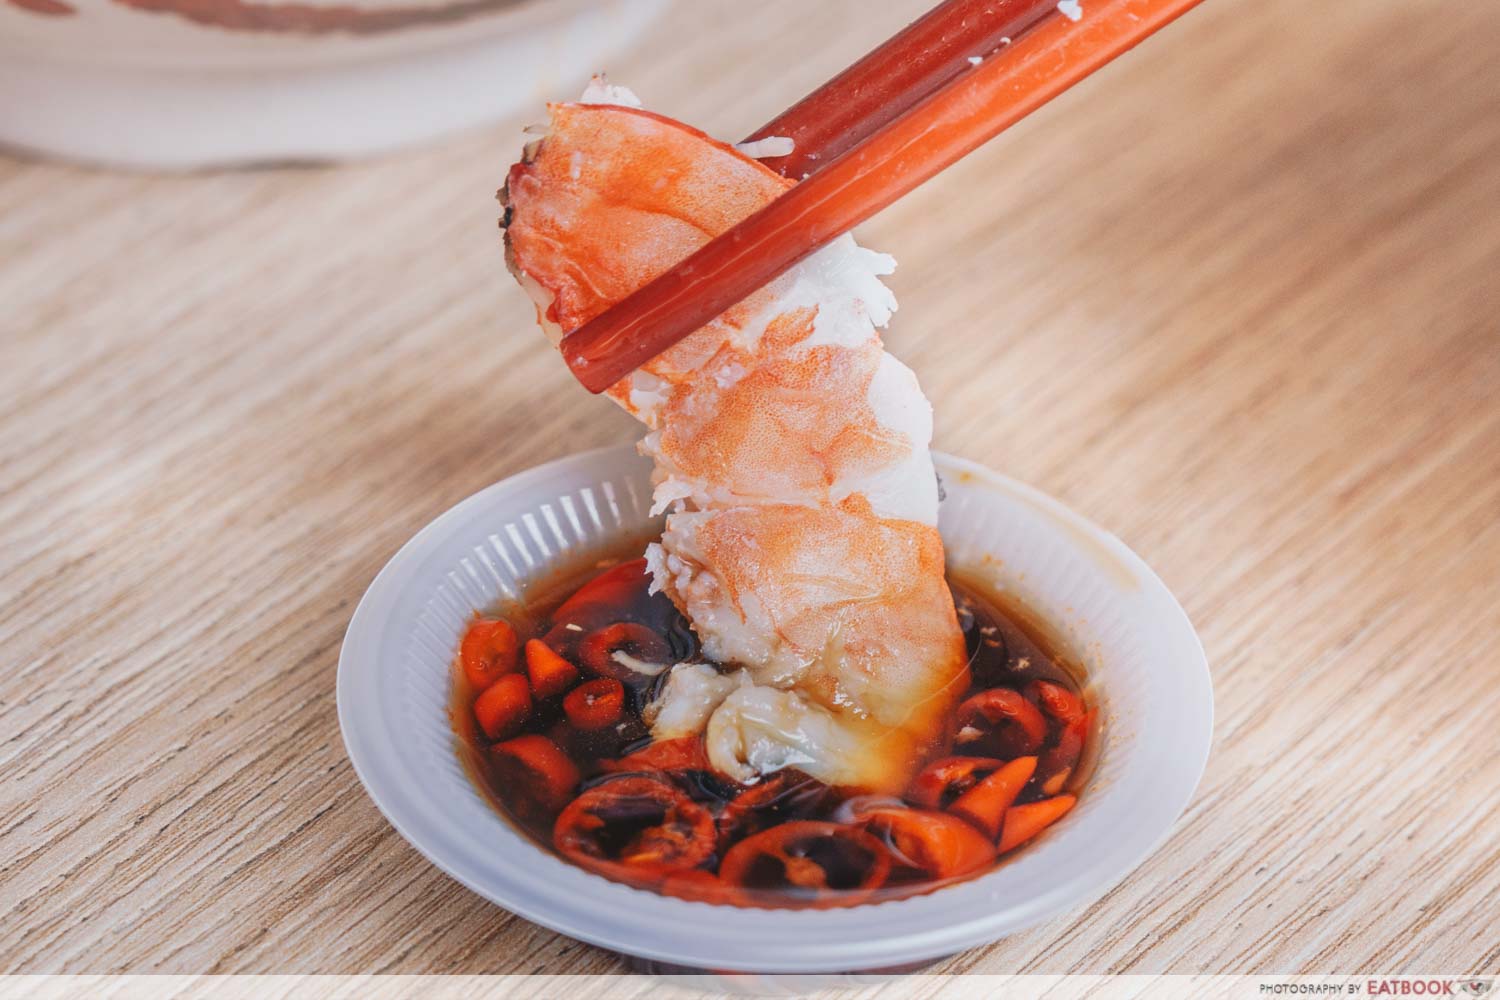 East Treasure Speciality Prawn Noodles - Prawn dipped in chilli